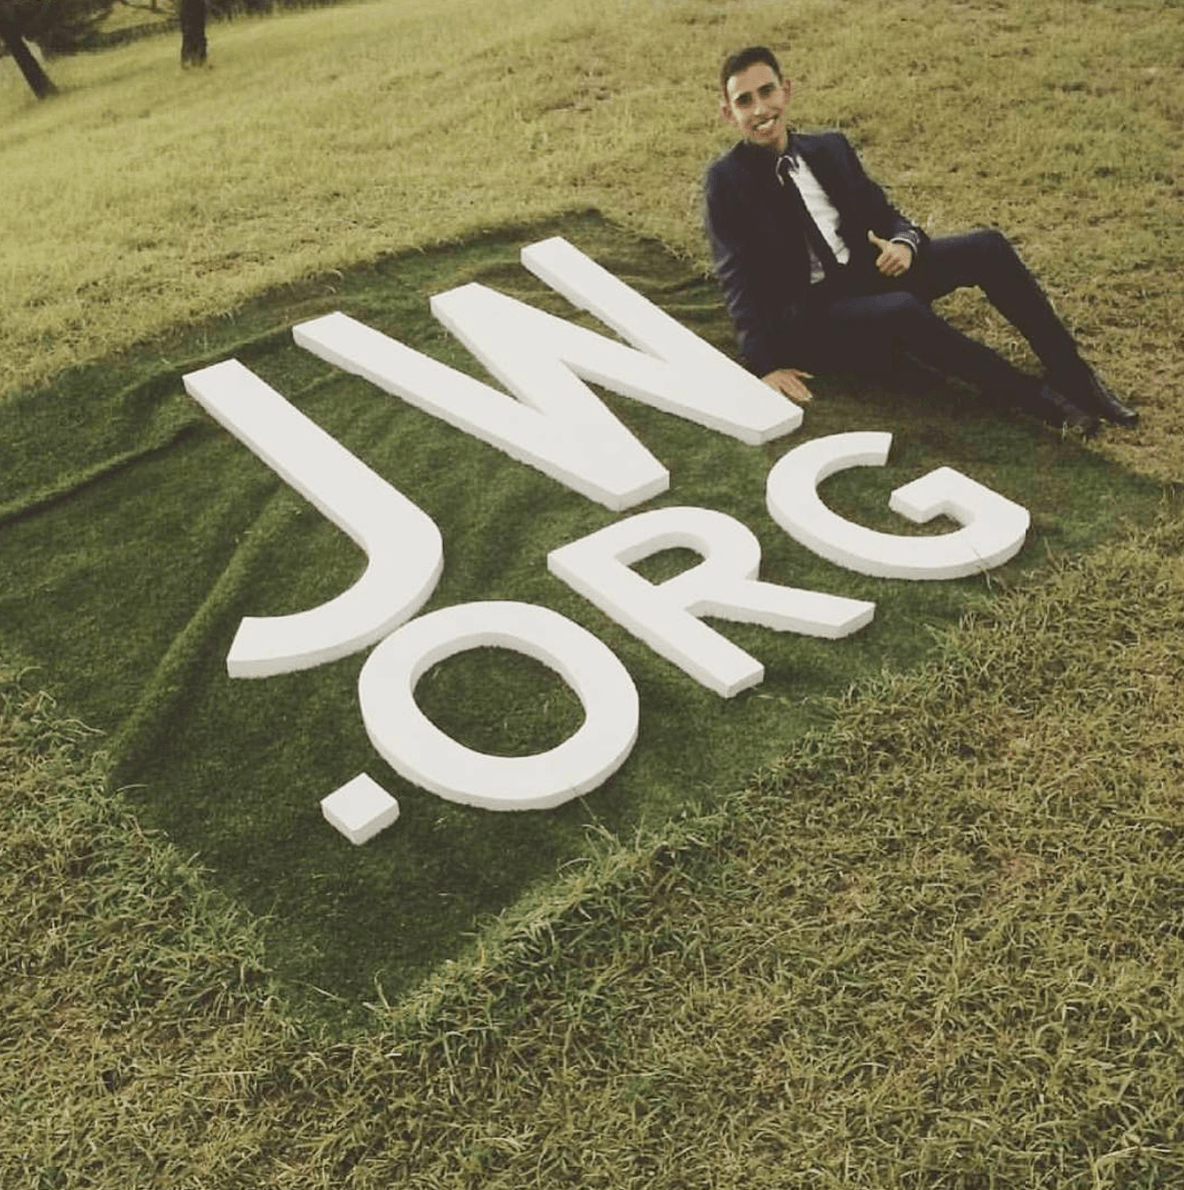 Jw.org Logo - Holy drain covers: No expense spared on new Warwick headquarters ...